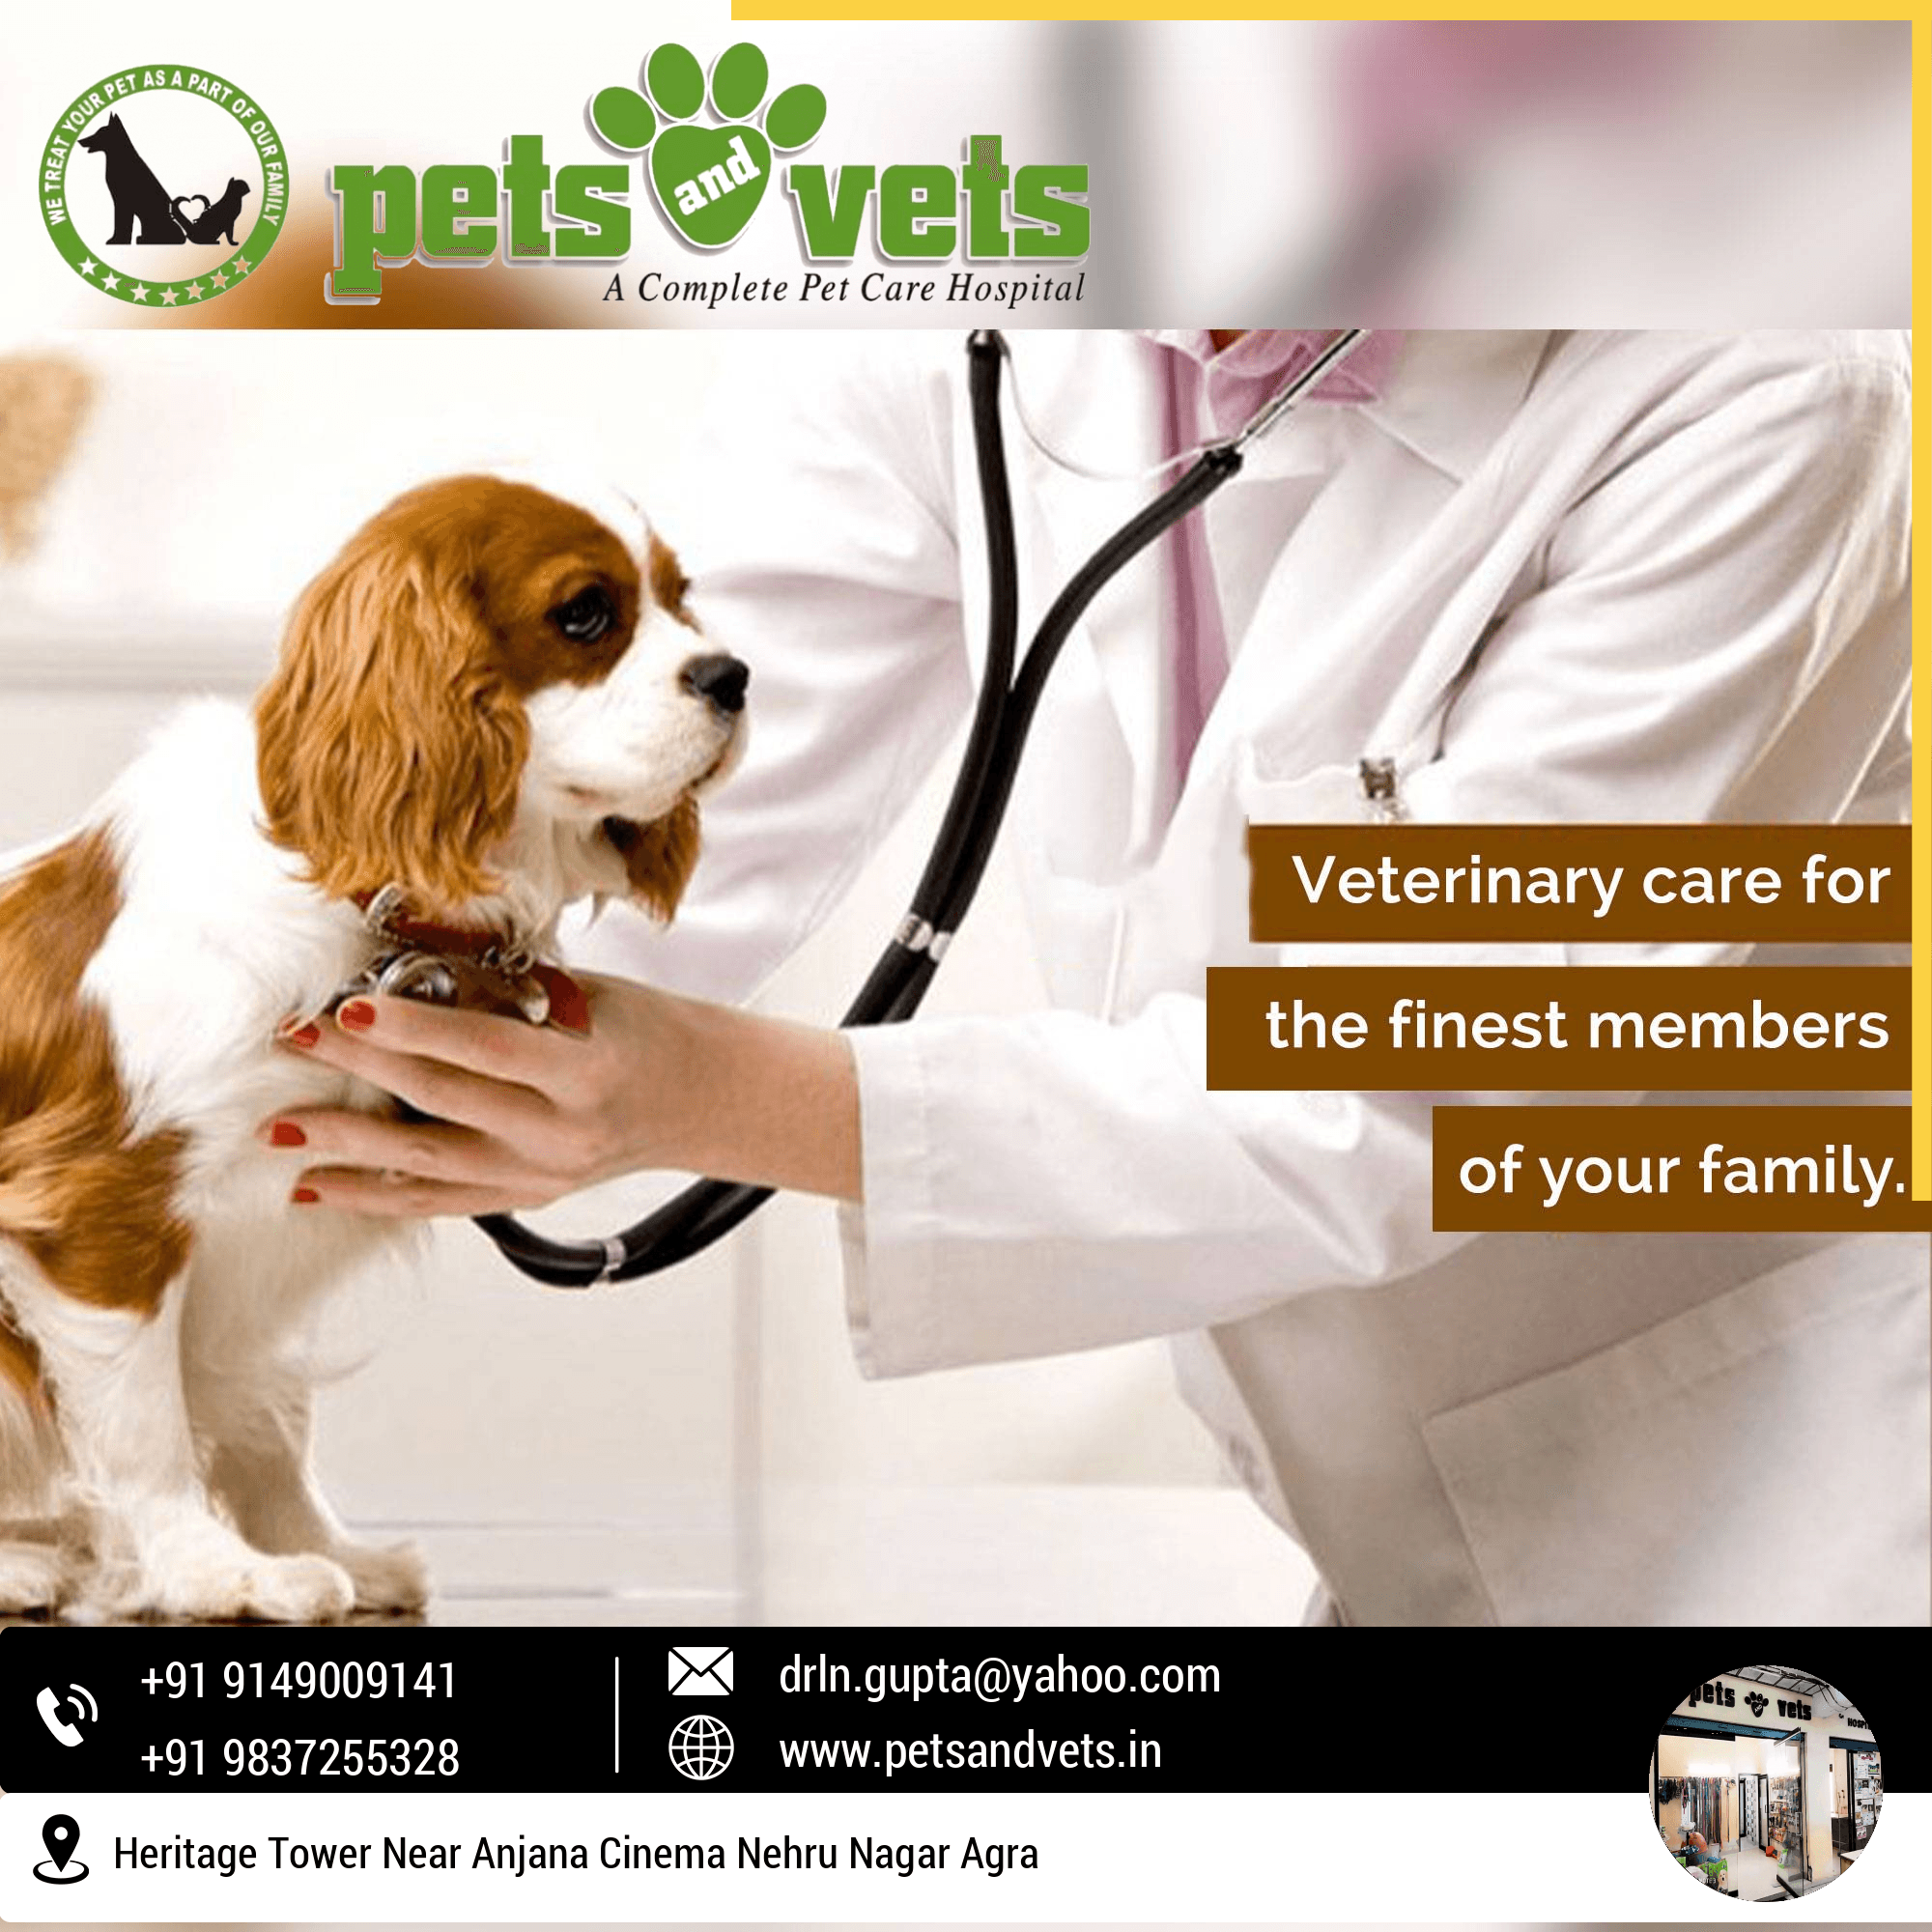 Dr. Pets and Vets Multi-speciality Dog and Cat Clinic